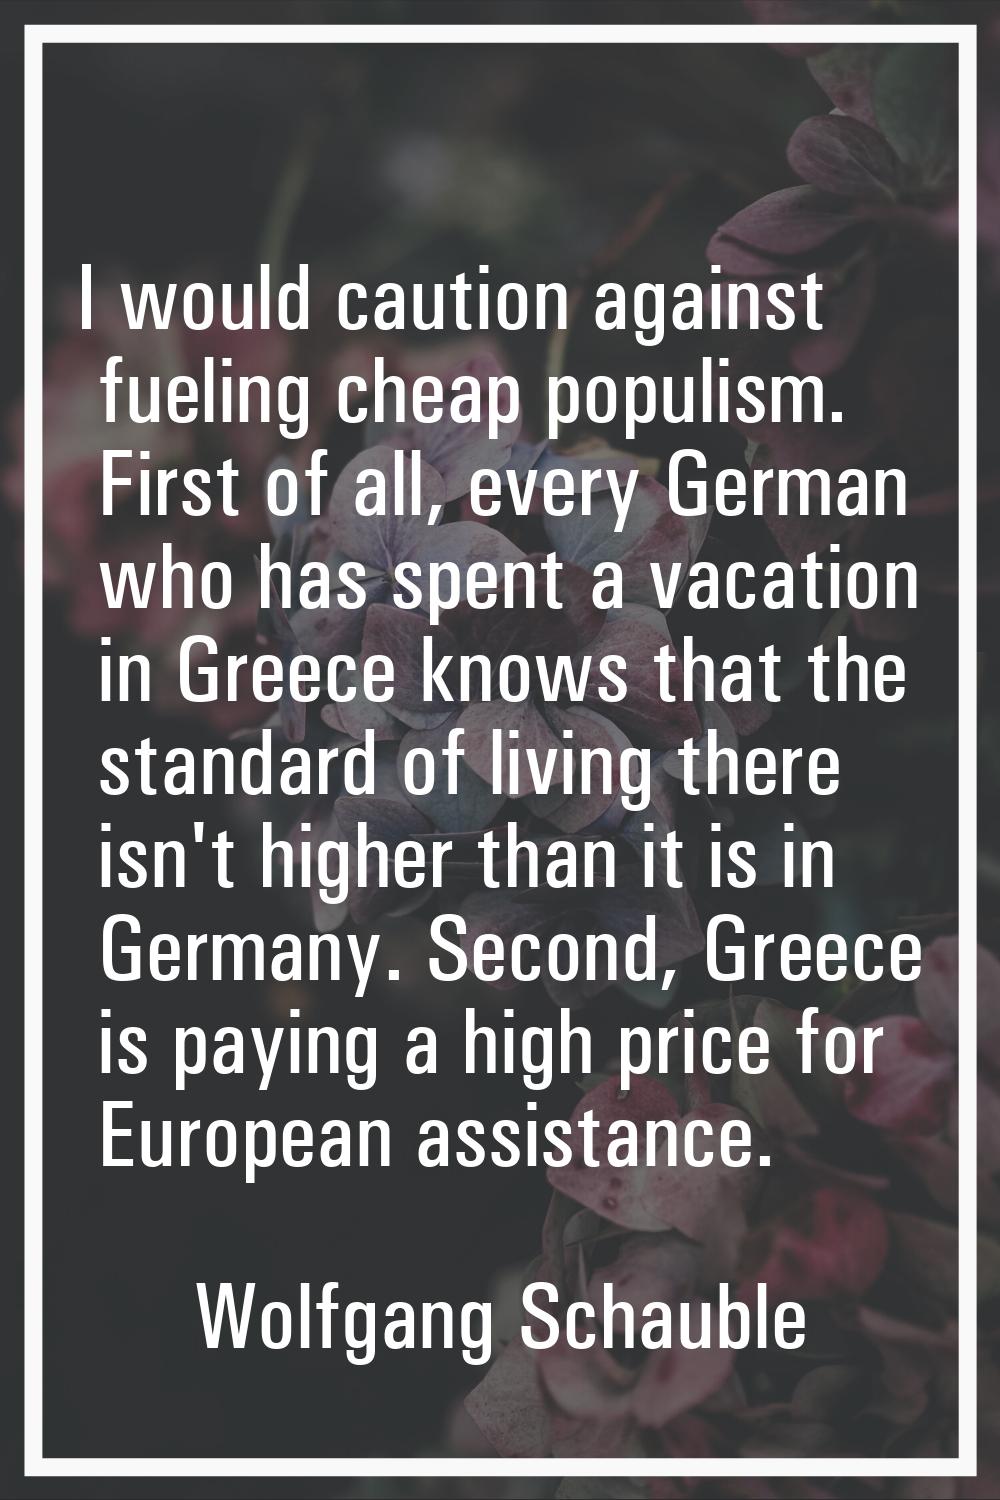 I would caution against fueling cheap populism. First of all, every German who has spent a vacation